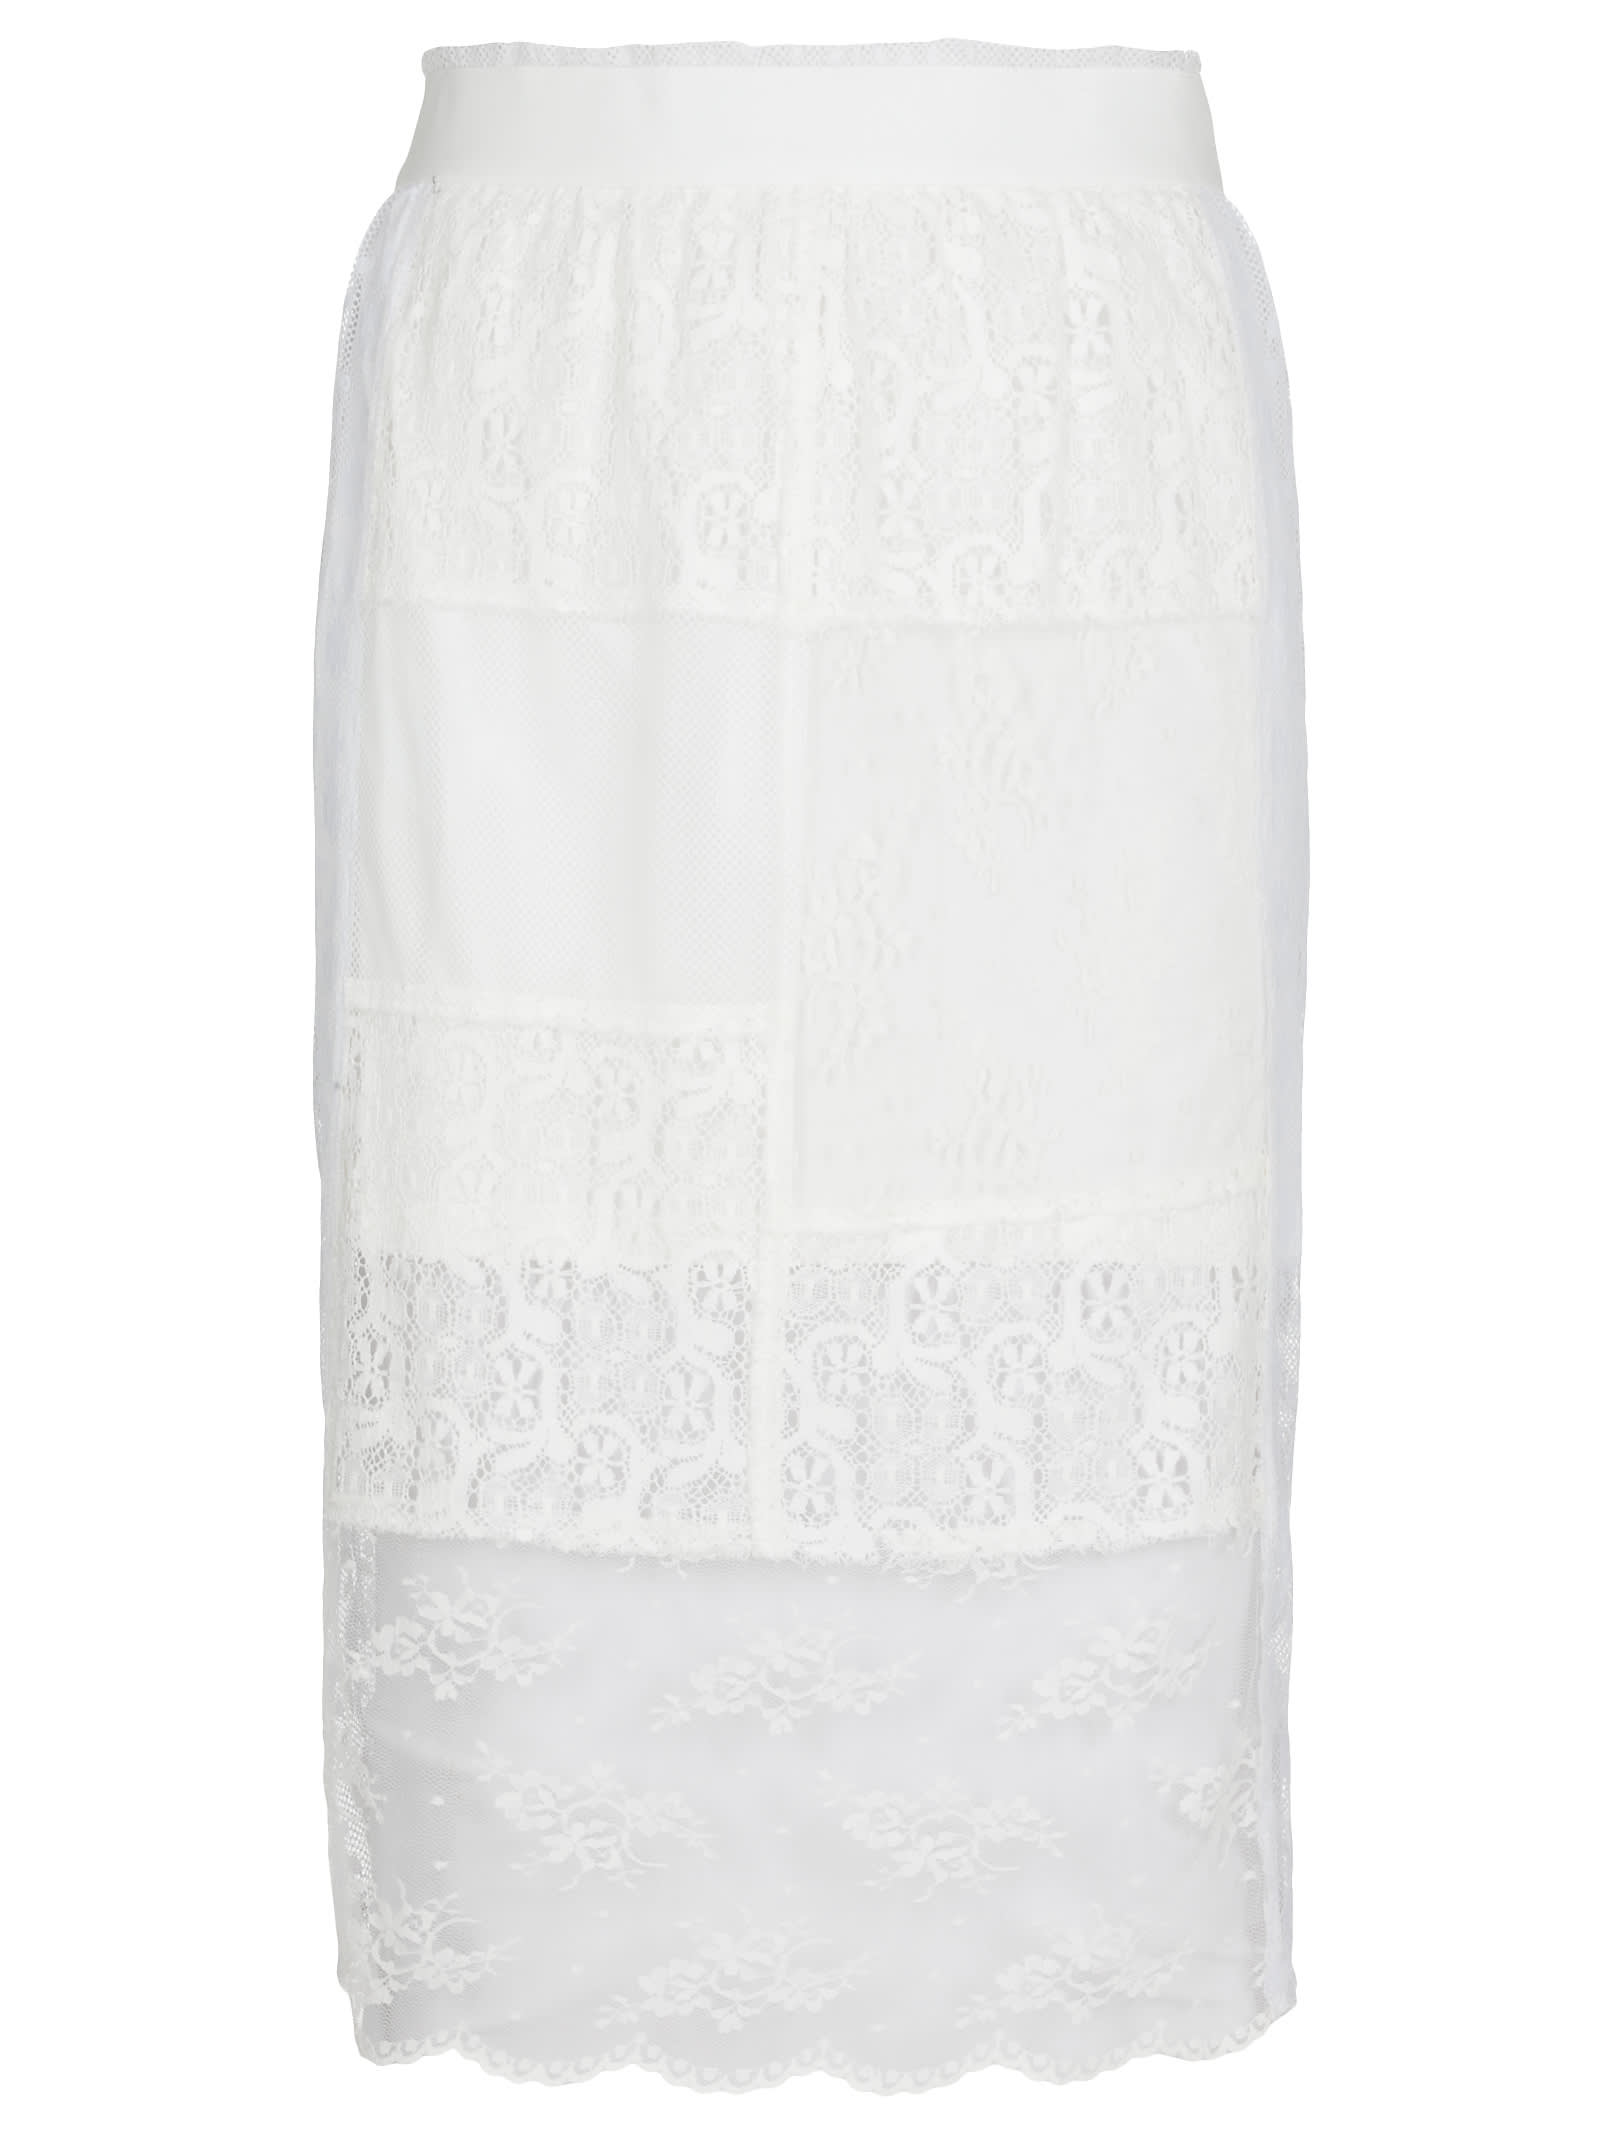 Mcq By Alexander Mcqueen Laces Skirt In White/cream